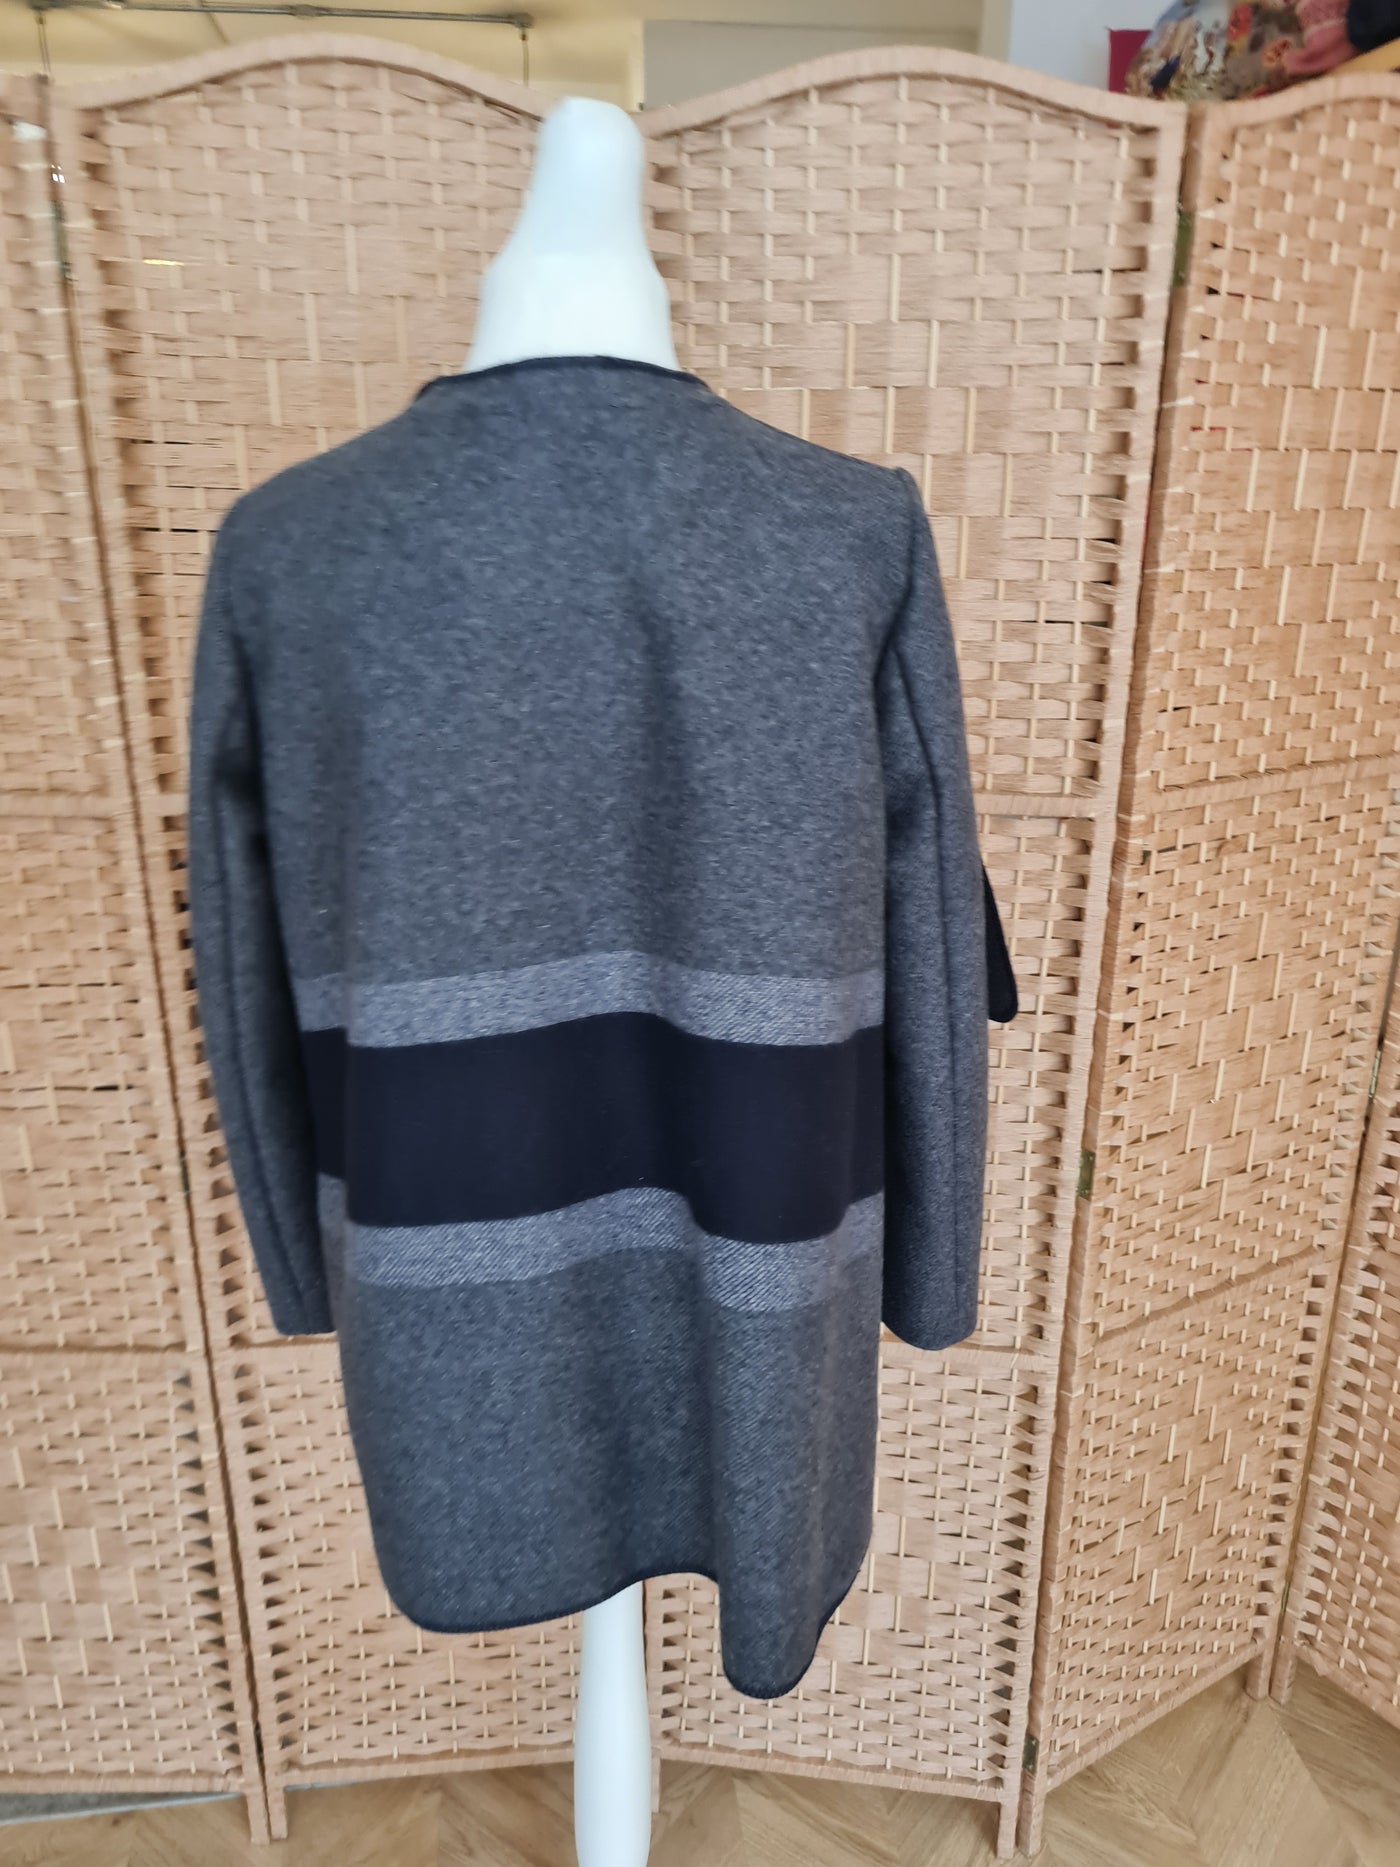 Tommy Hilfiger Grey Waterfall coat S